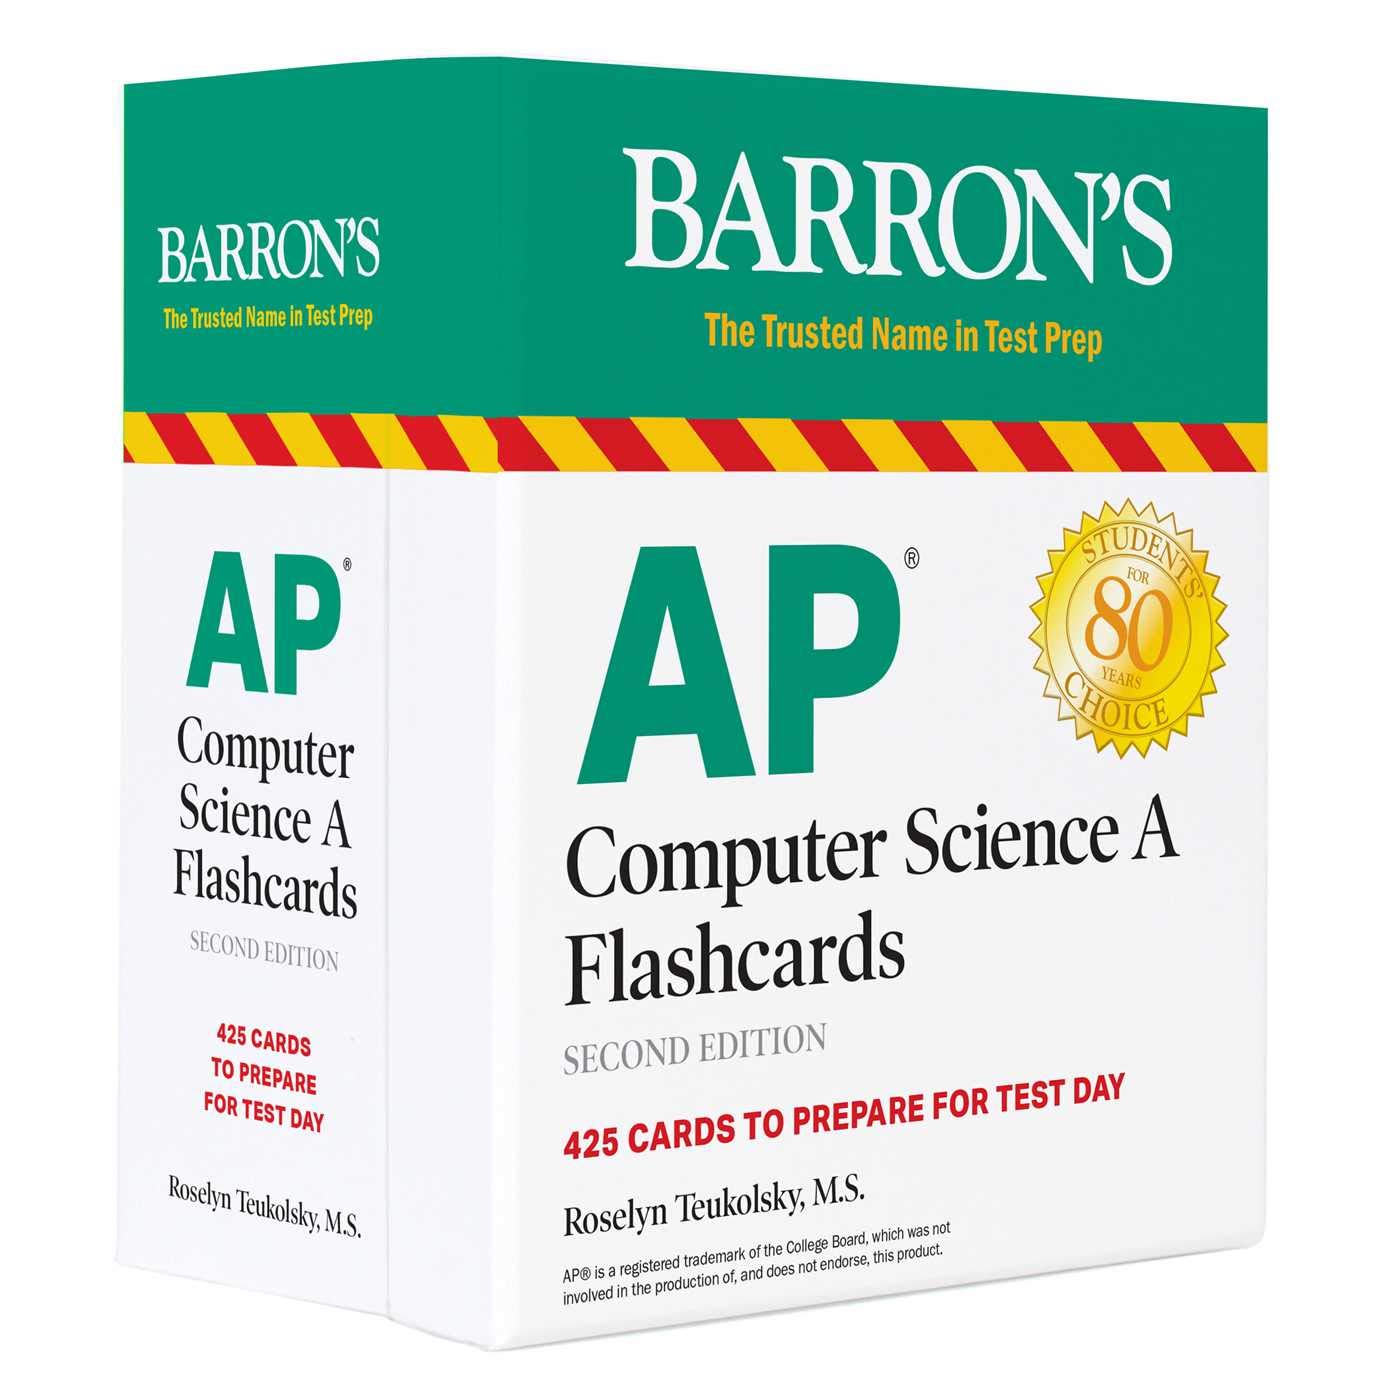 AP Computer Science A Flashcards: 425 Cards to Prepare for Test Day (Barron's AP)